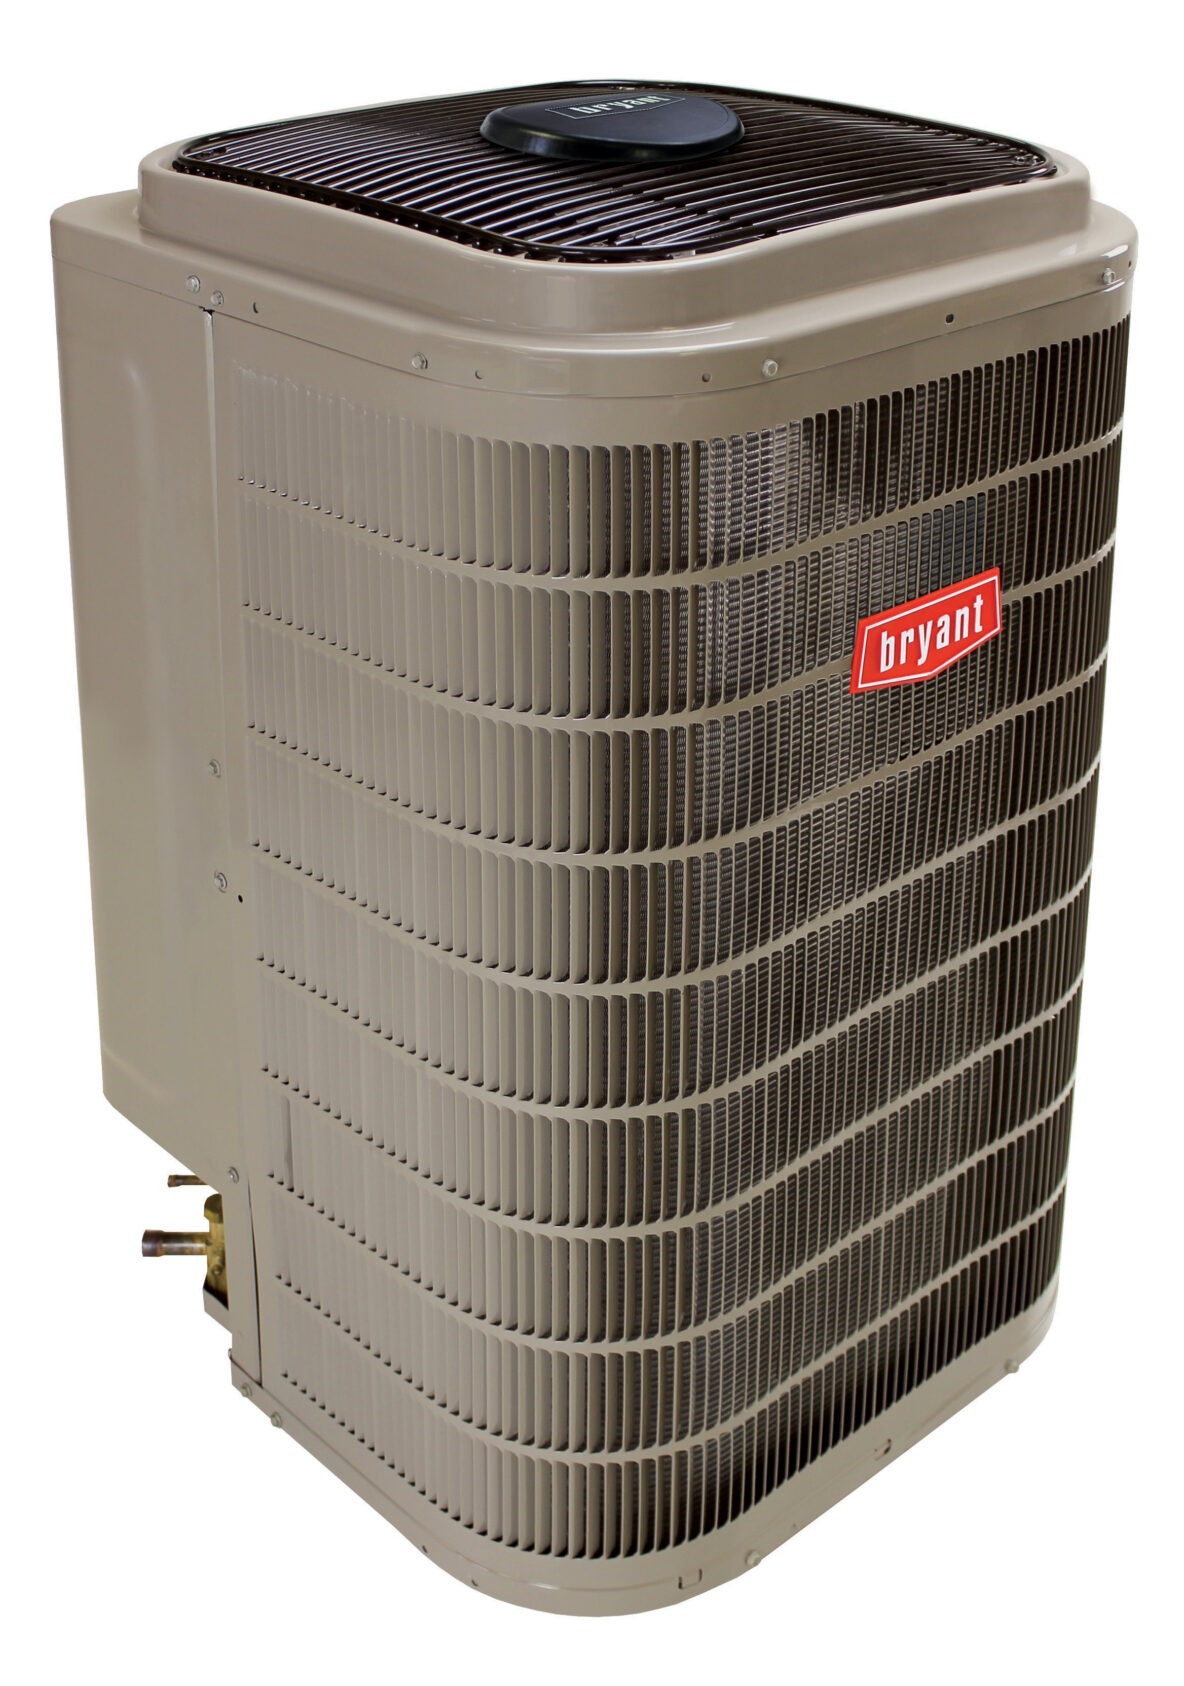 Bryant air conditioning unit. Superior Heating Cooling Plumbing blog image.